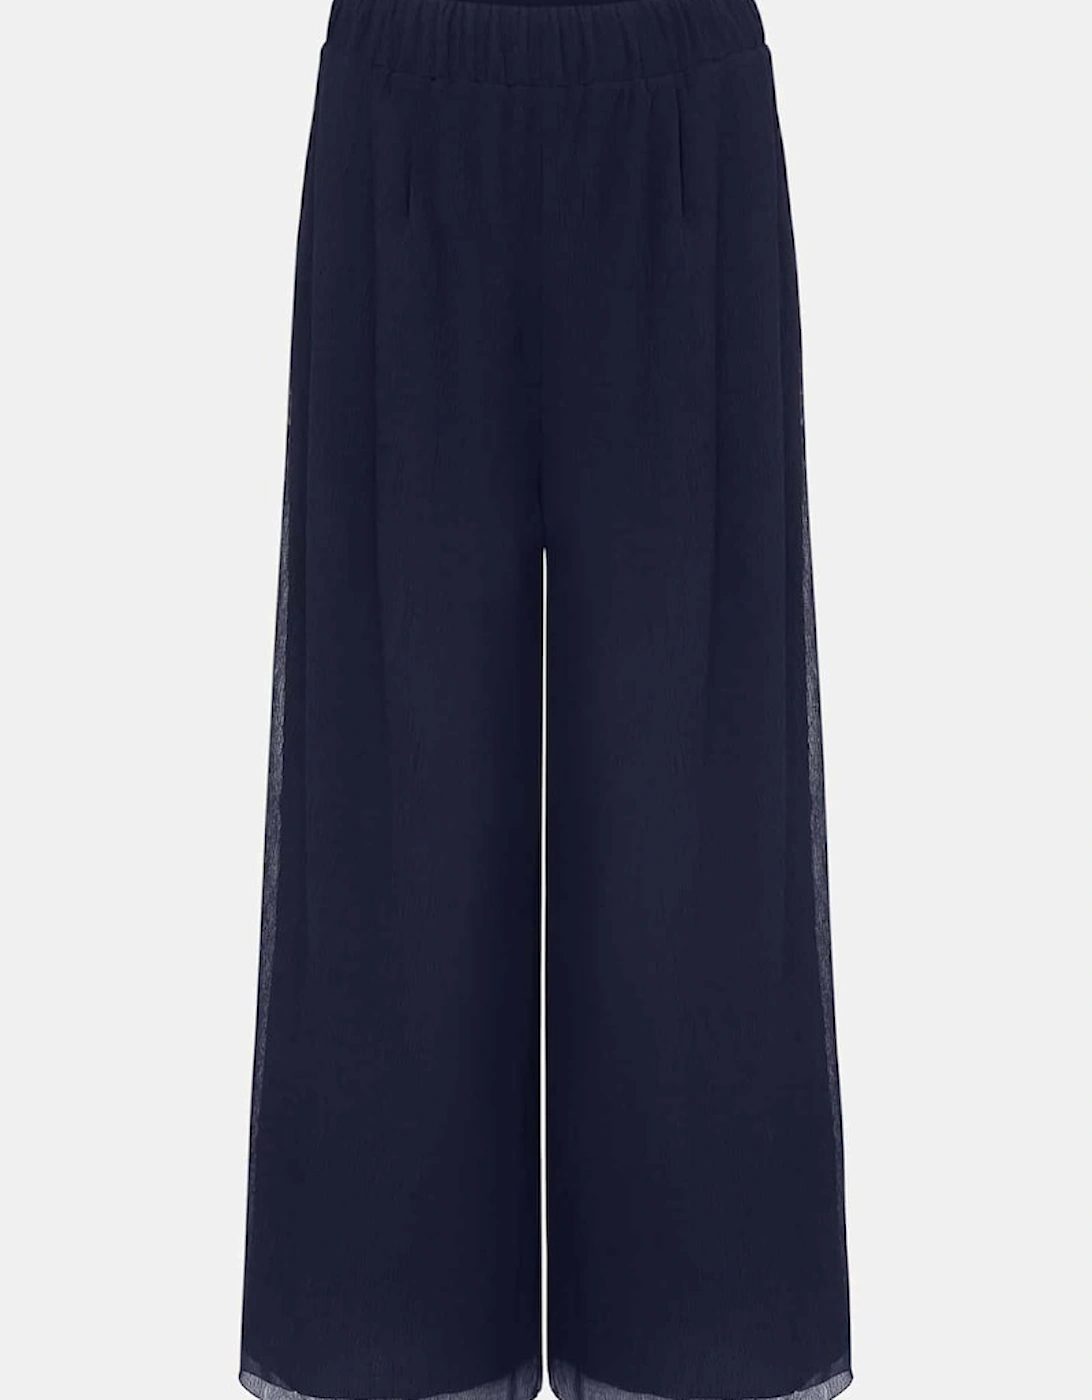 Aster Plisse Trousers Co-ord